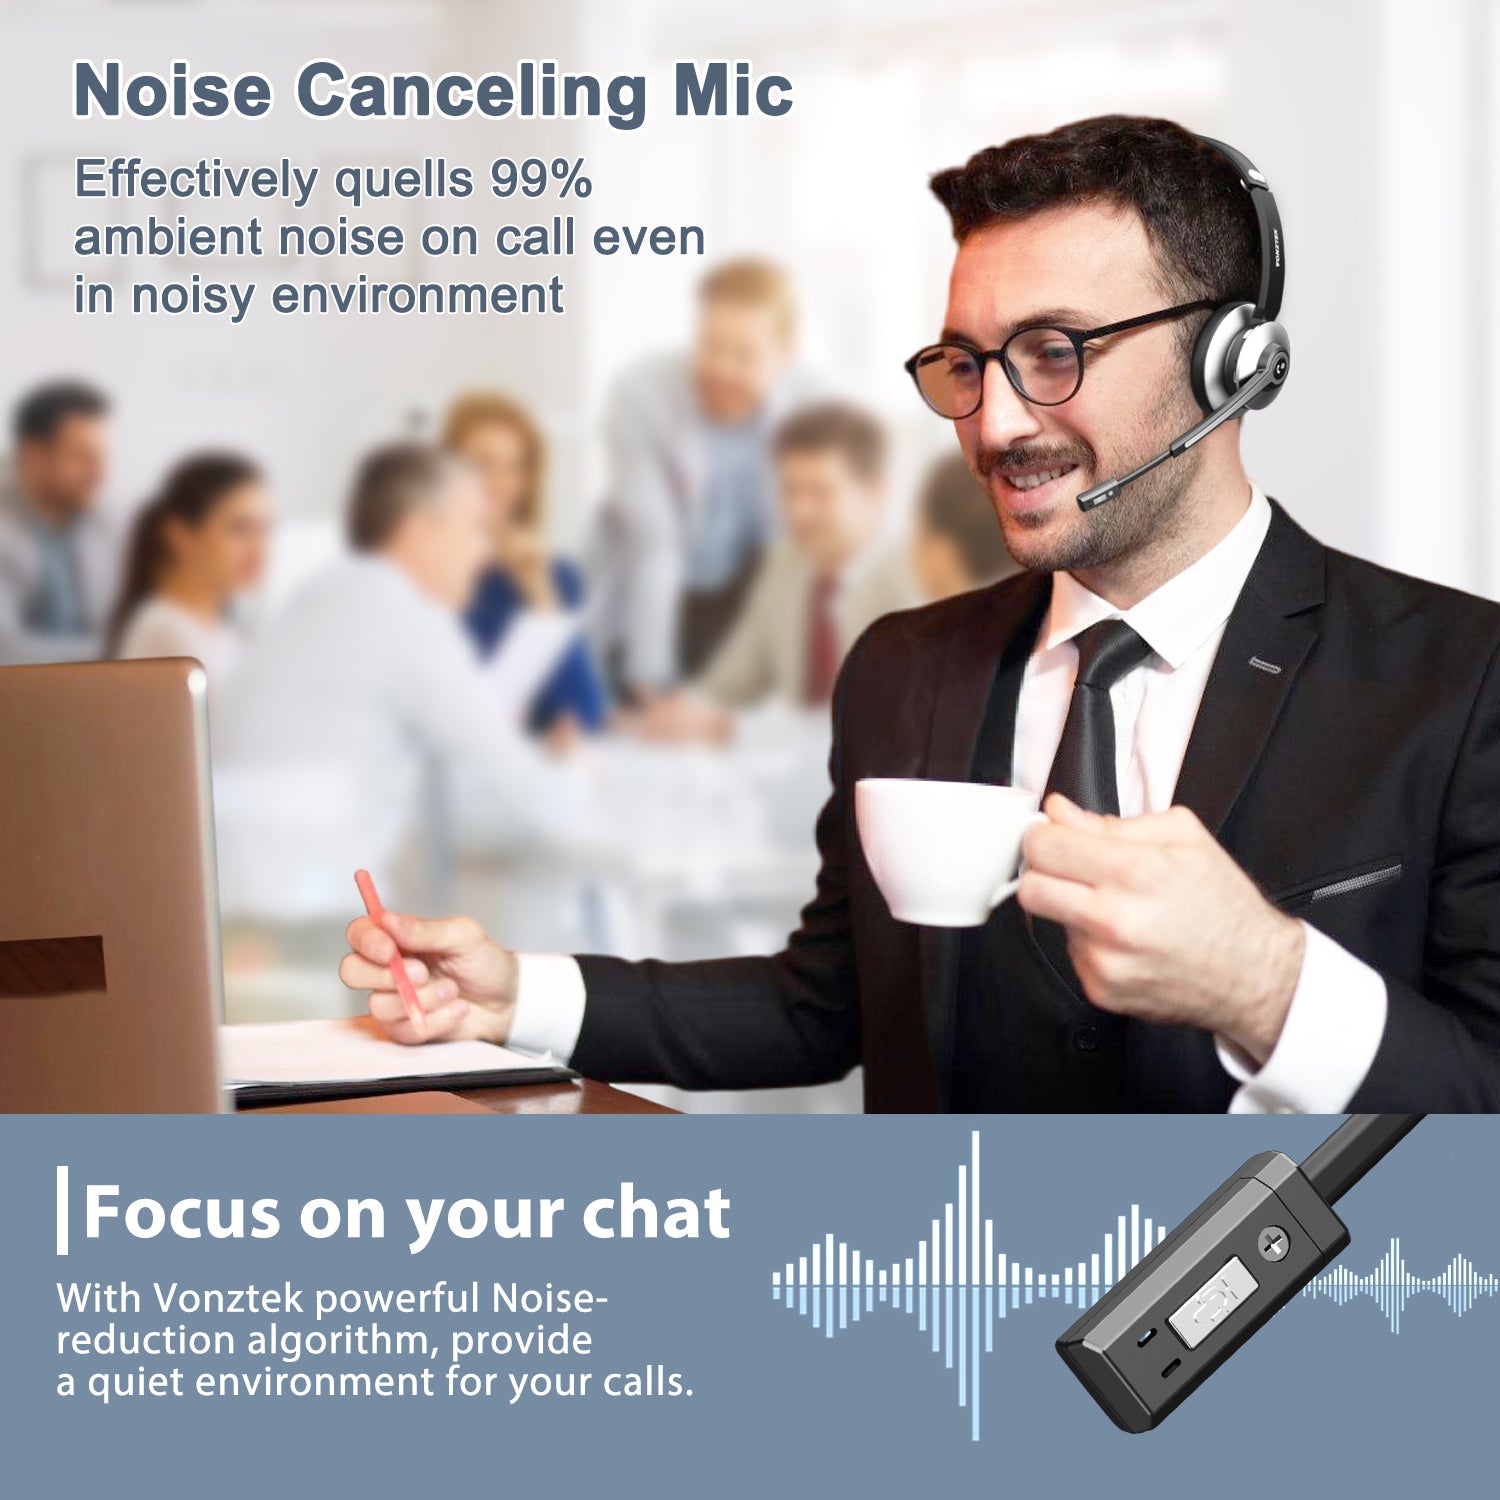 Noise cancelling mic,Effectively quells 99% ambient noise on call even in noisy environment.Focus on your chat,With vonztek powerful noise-reduction algorithm,provide a quiet envir onment for your calls.